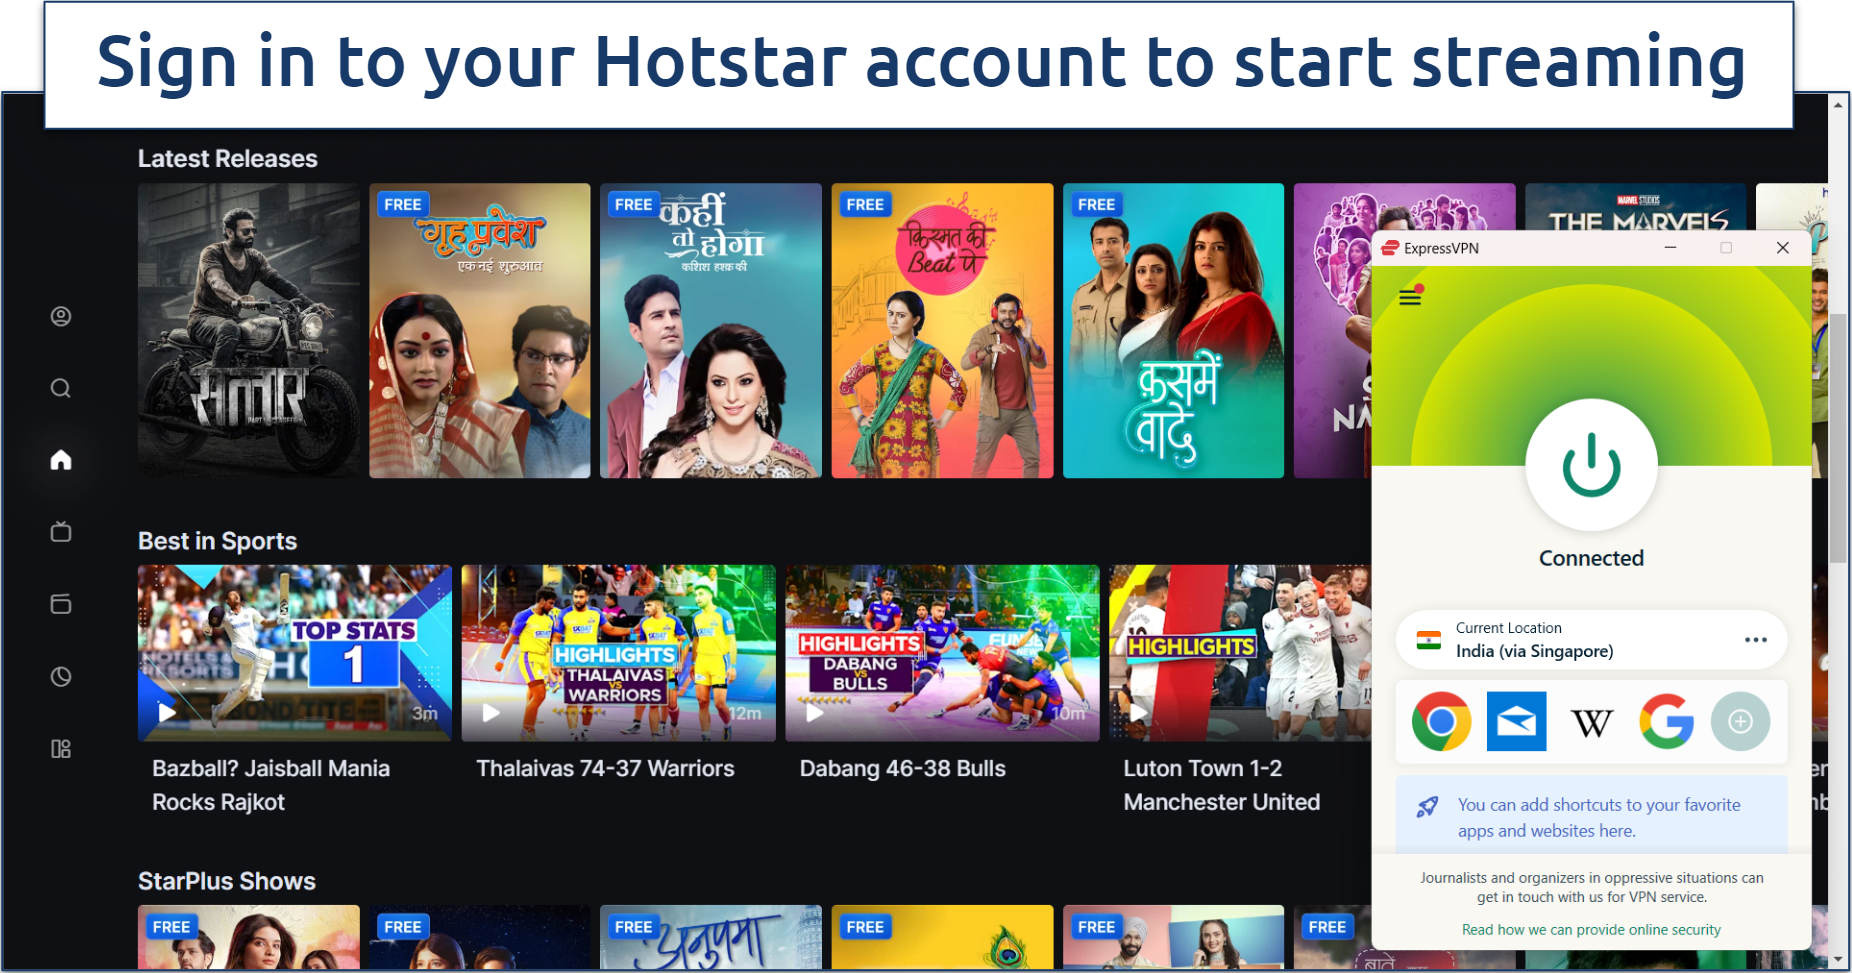 Screenshot of Hotstar's home page